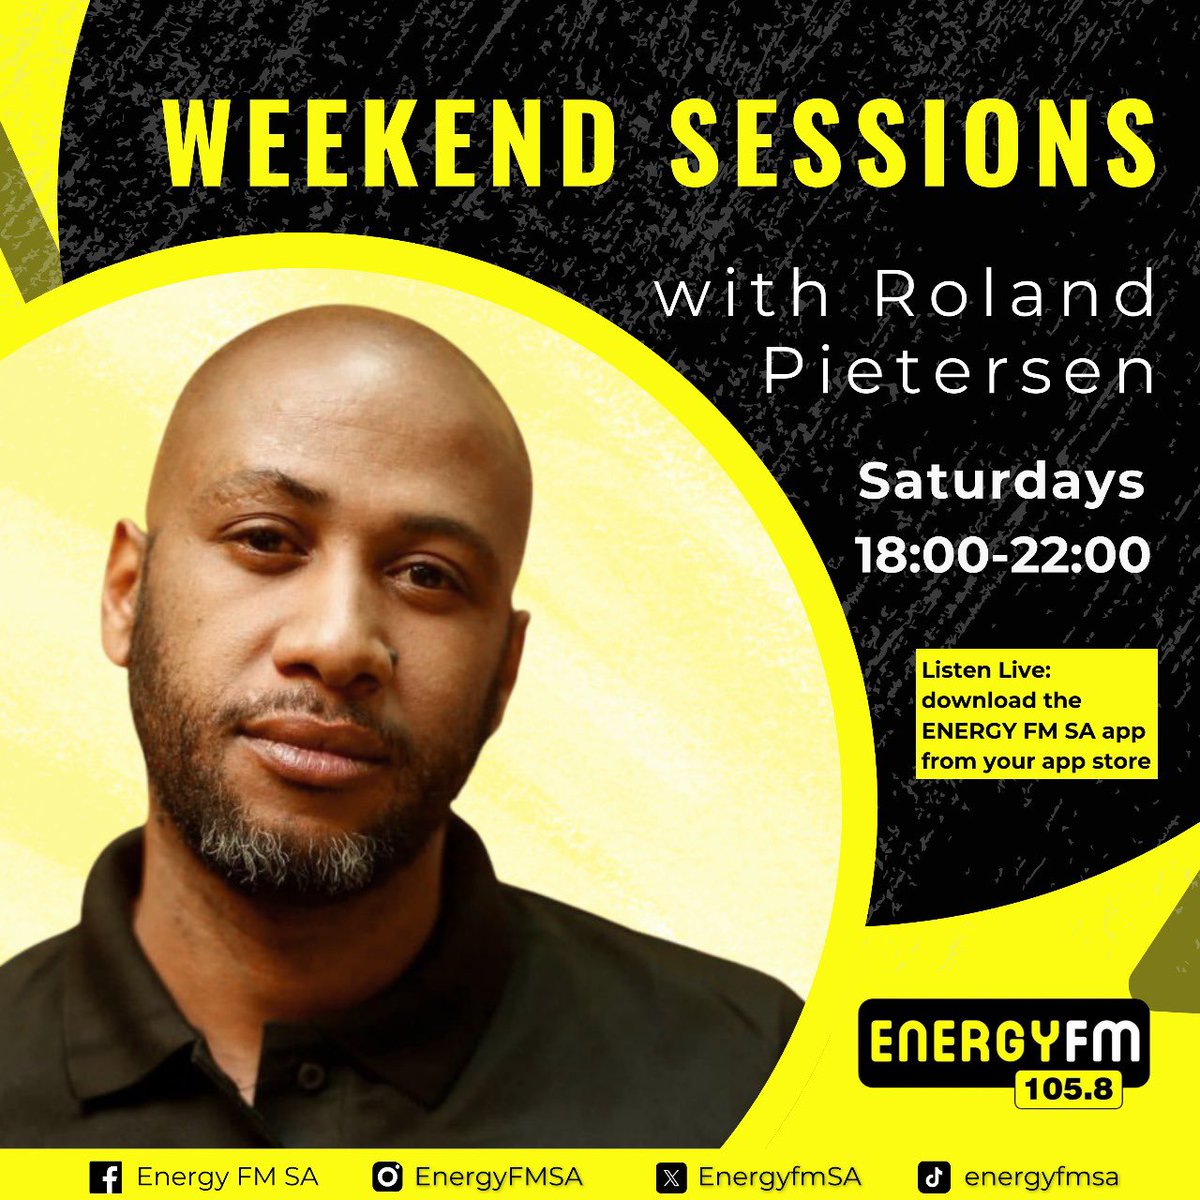 Roland Pietersen is with you on #WeekendSessions making sure that your evening is warm and entertaining.